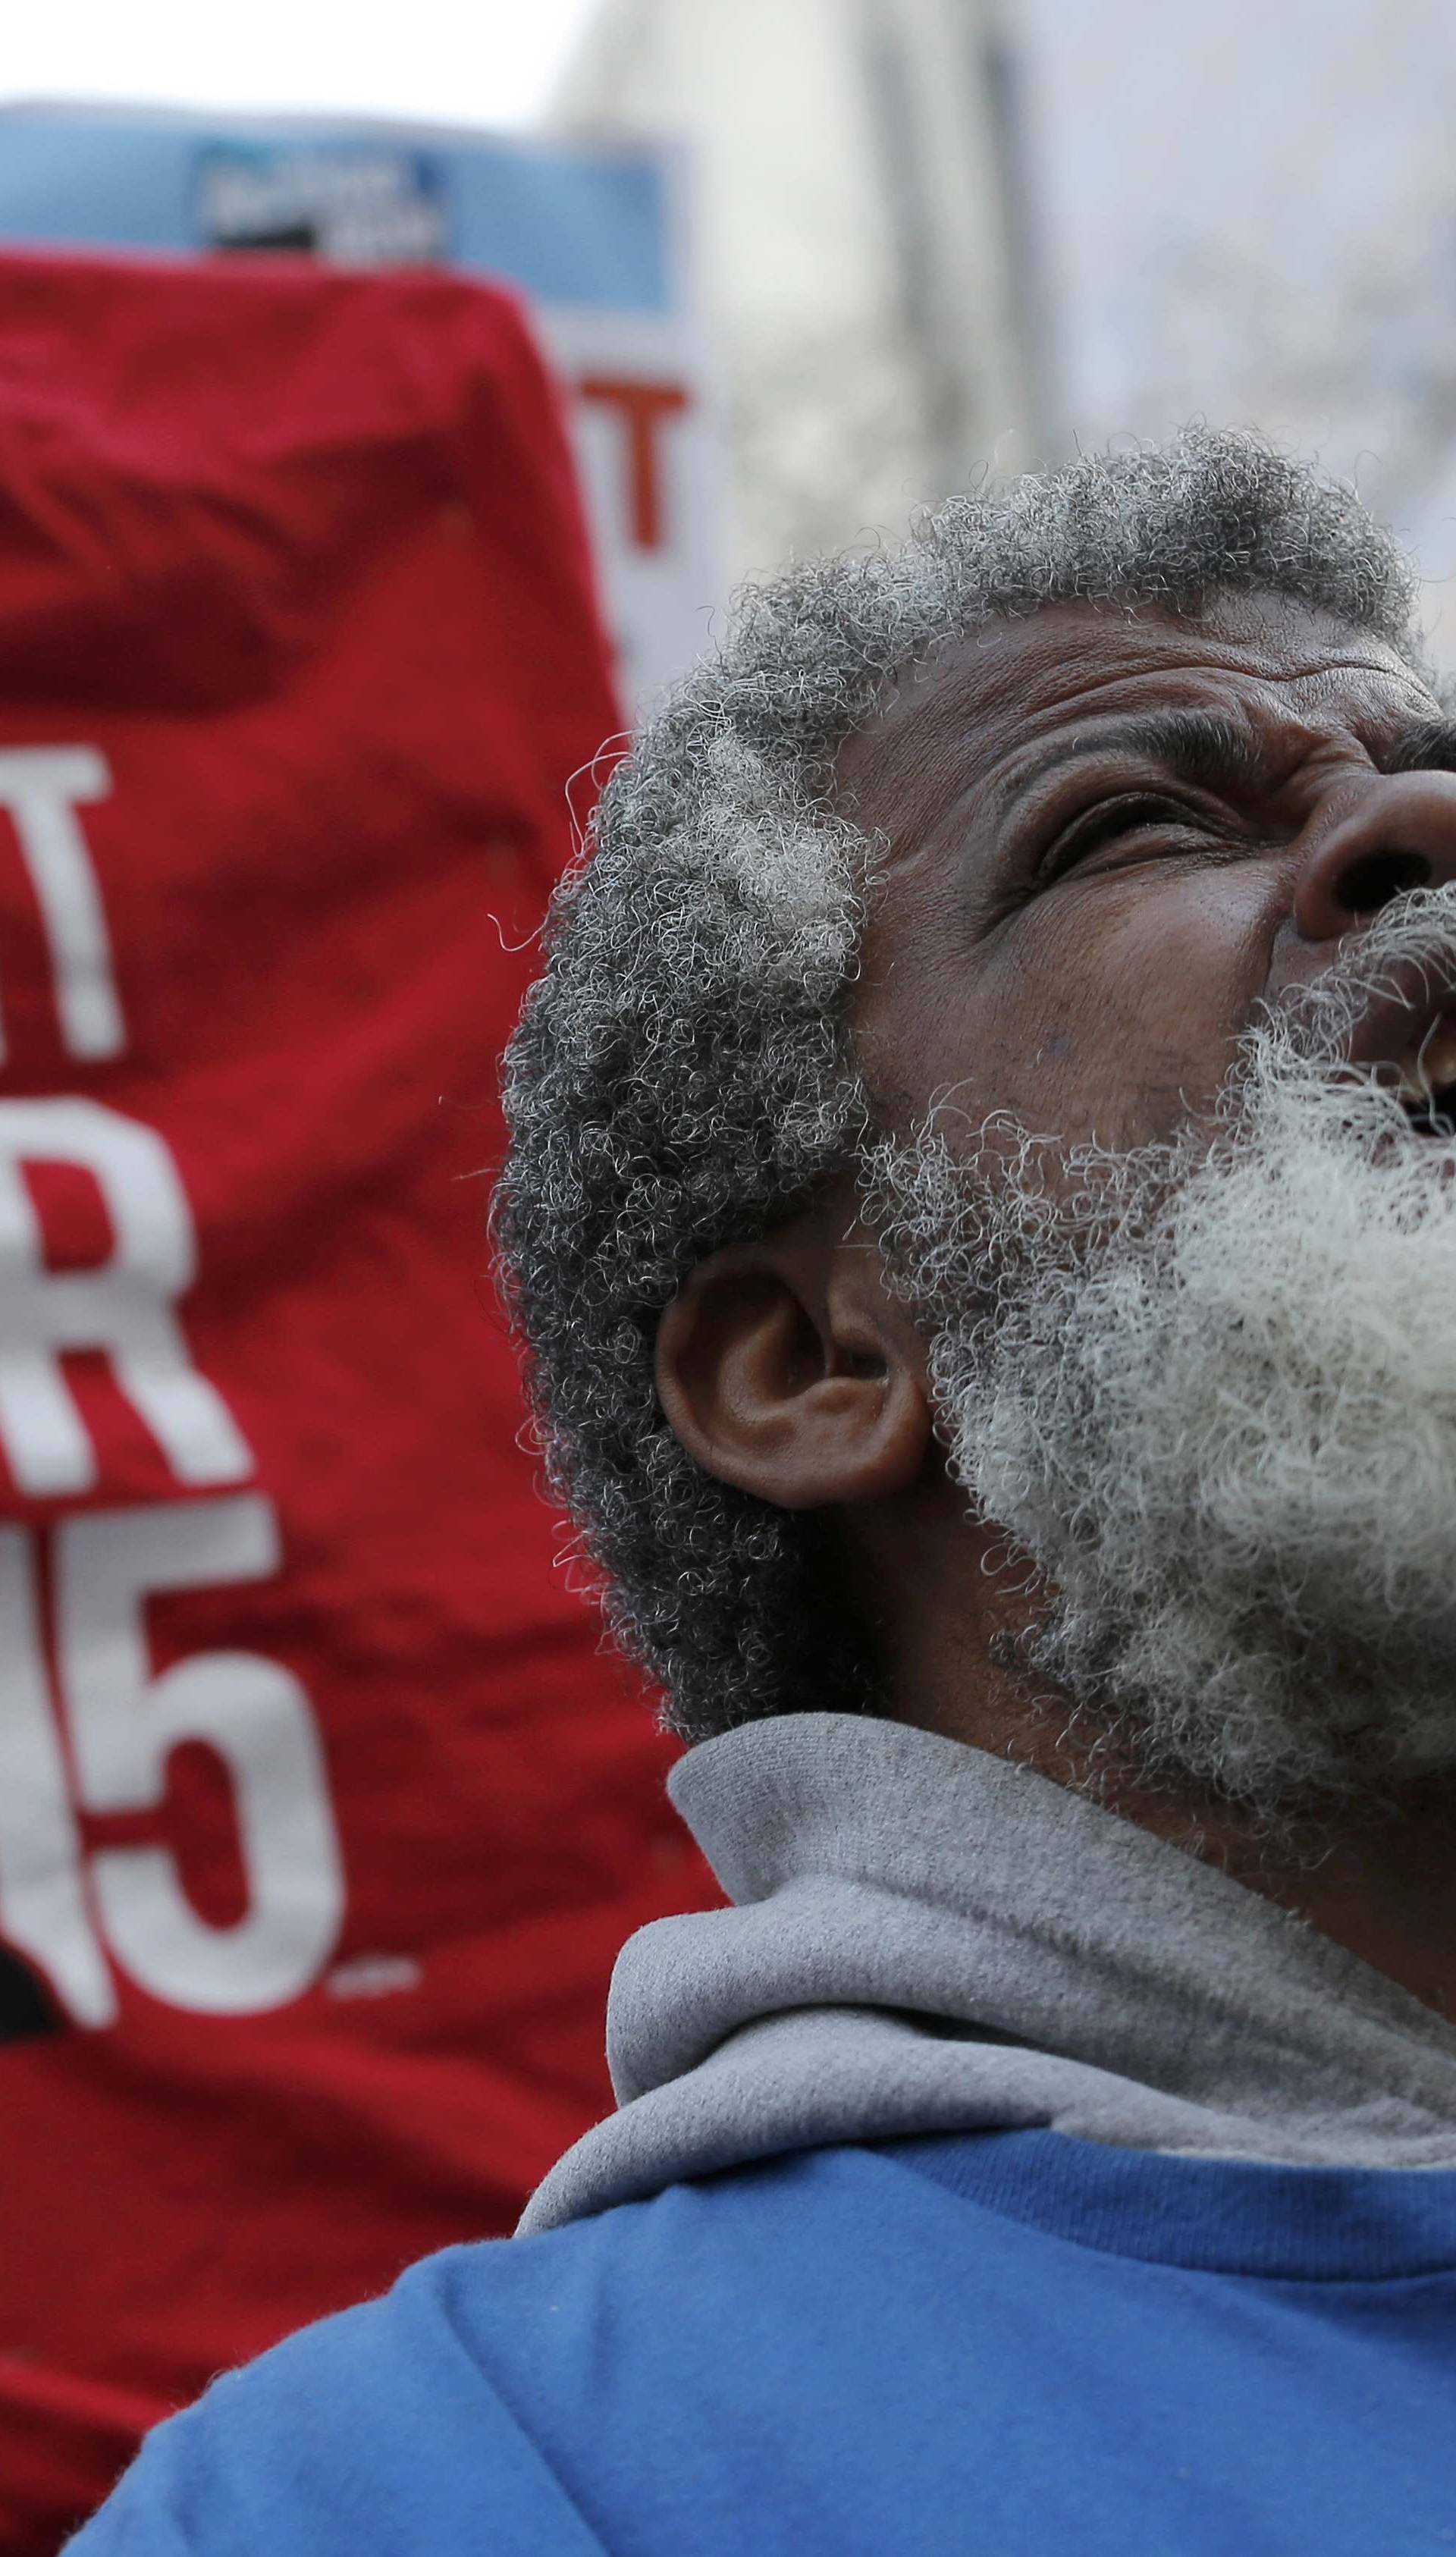 A demonstrator reacts as they gather on the sidewalk with placards during a protest for a $15-an-hour nationwide minimum wage in downtown Chicago